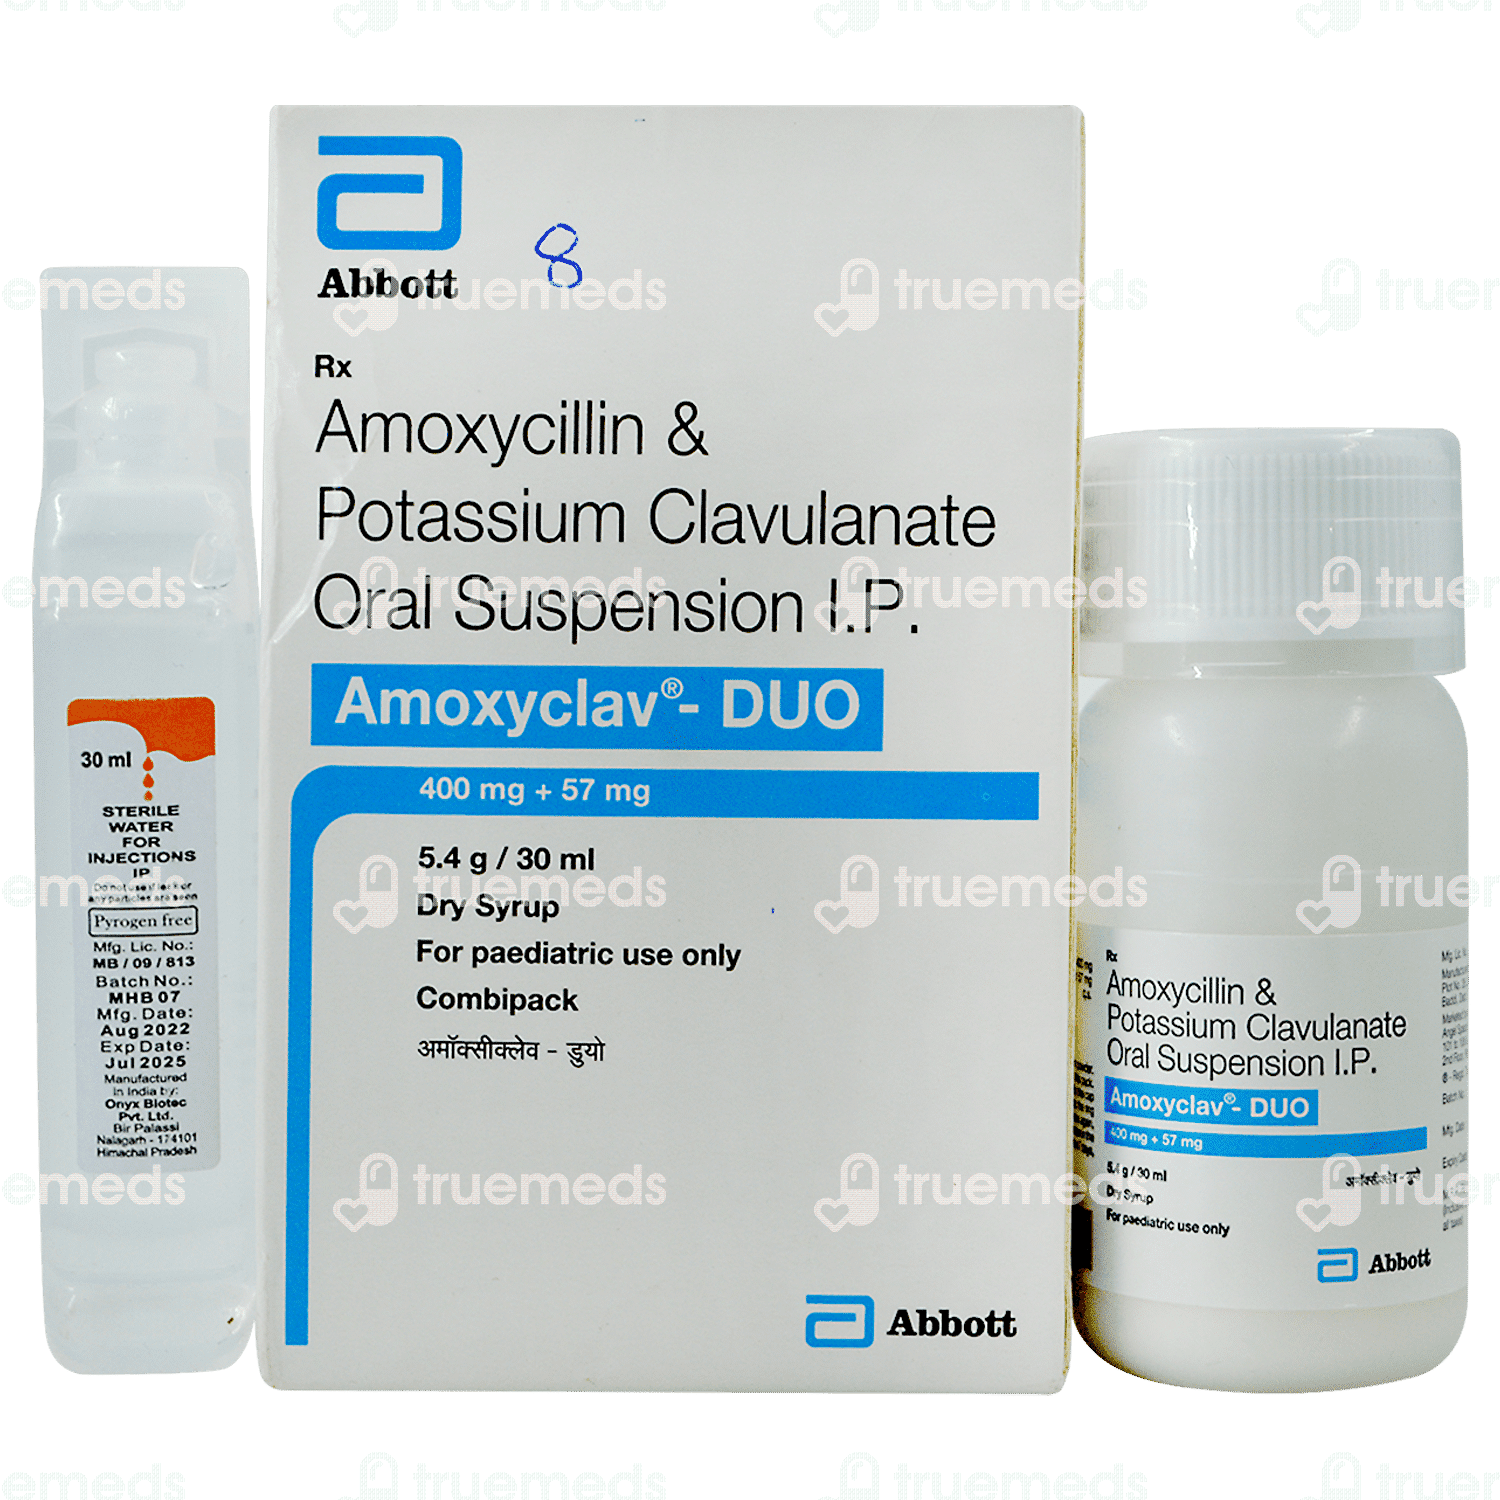 https://assets.truemeds.in/Images/ProductImage/TM-DRUP1-001232/amoxyclav-400-57-mg-duo-dry-syrup-30-ml_amoxyclav-40057-mg-duo-dry-syrup-30-ml--TM-DRUP1-001232_1.png